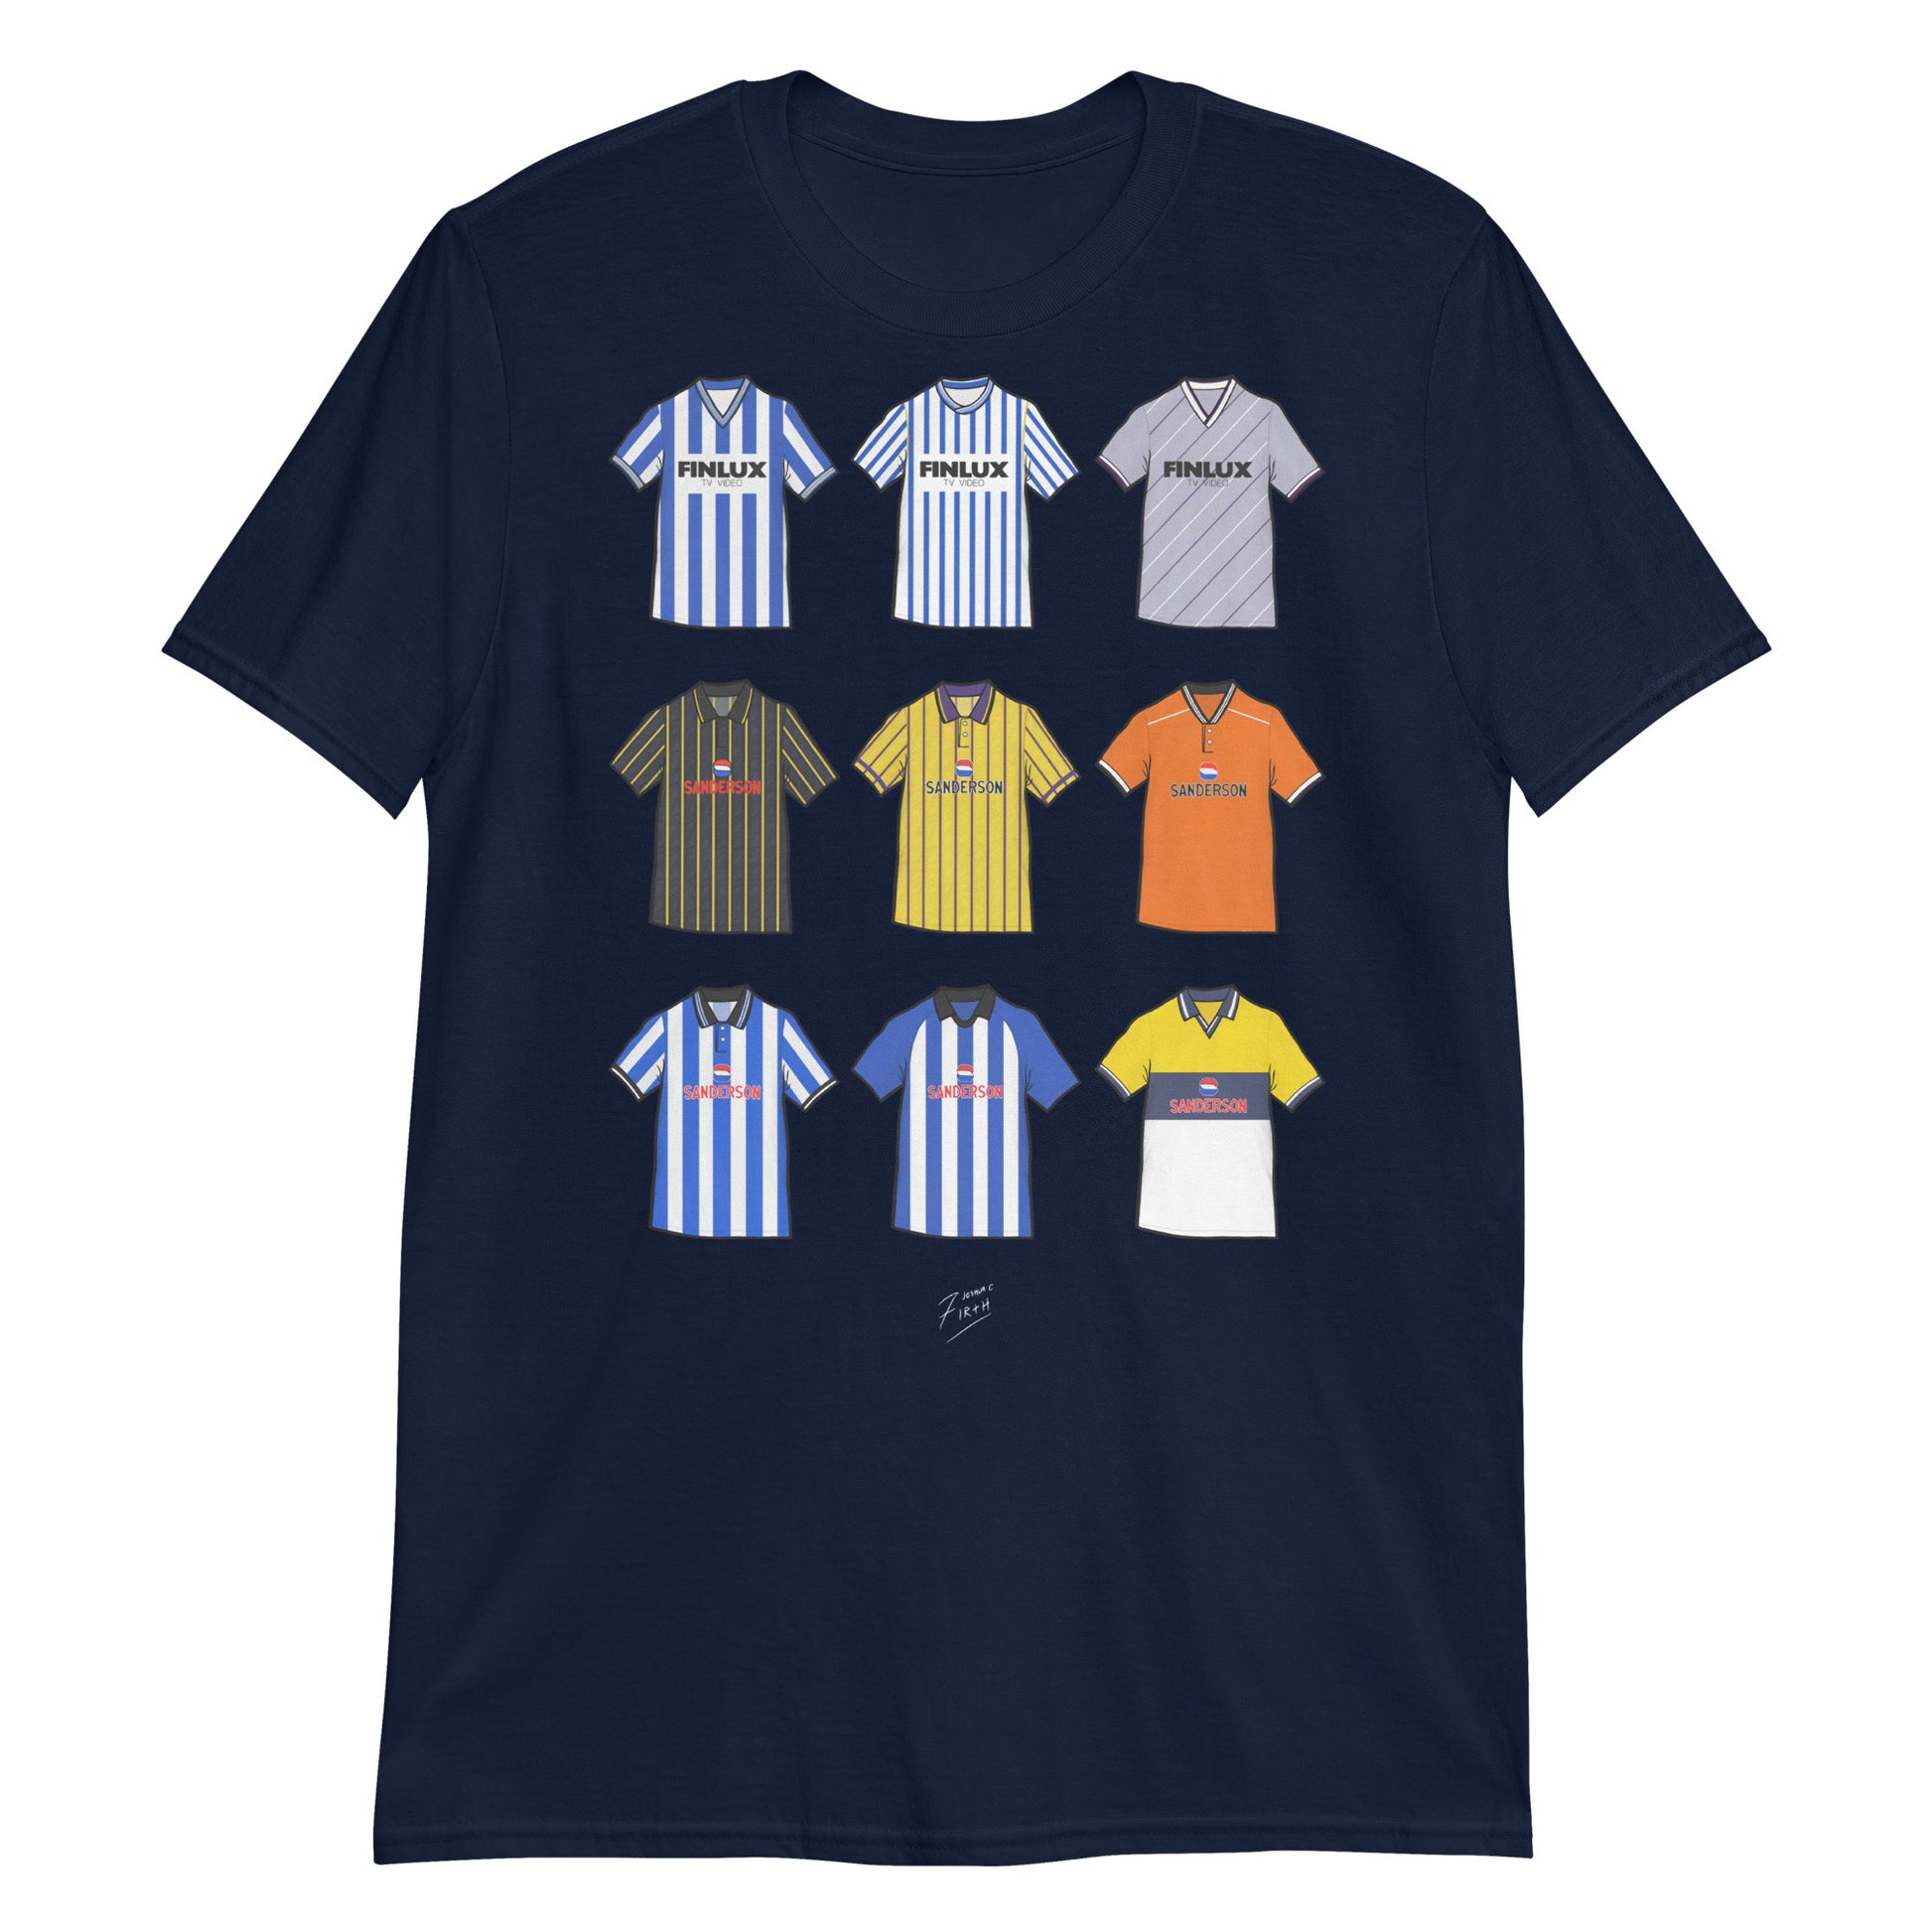 Navy Blue Sheffield Wednesday themed T-shirt inspired by their famous retro jerseys of the past! 